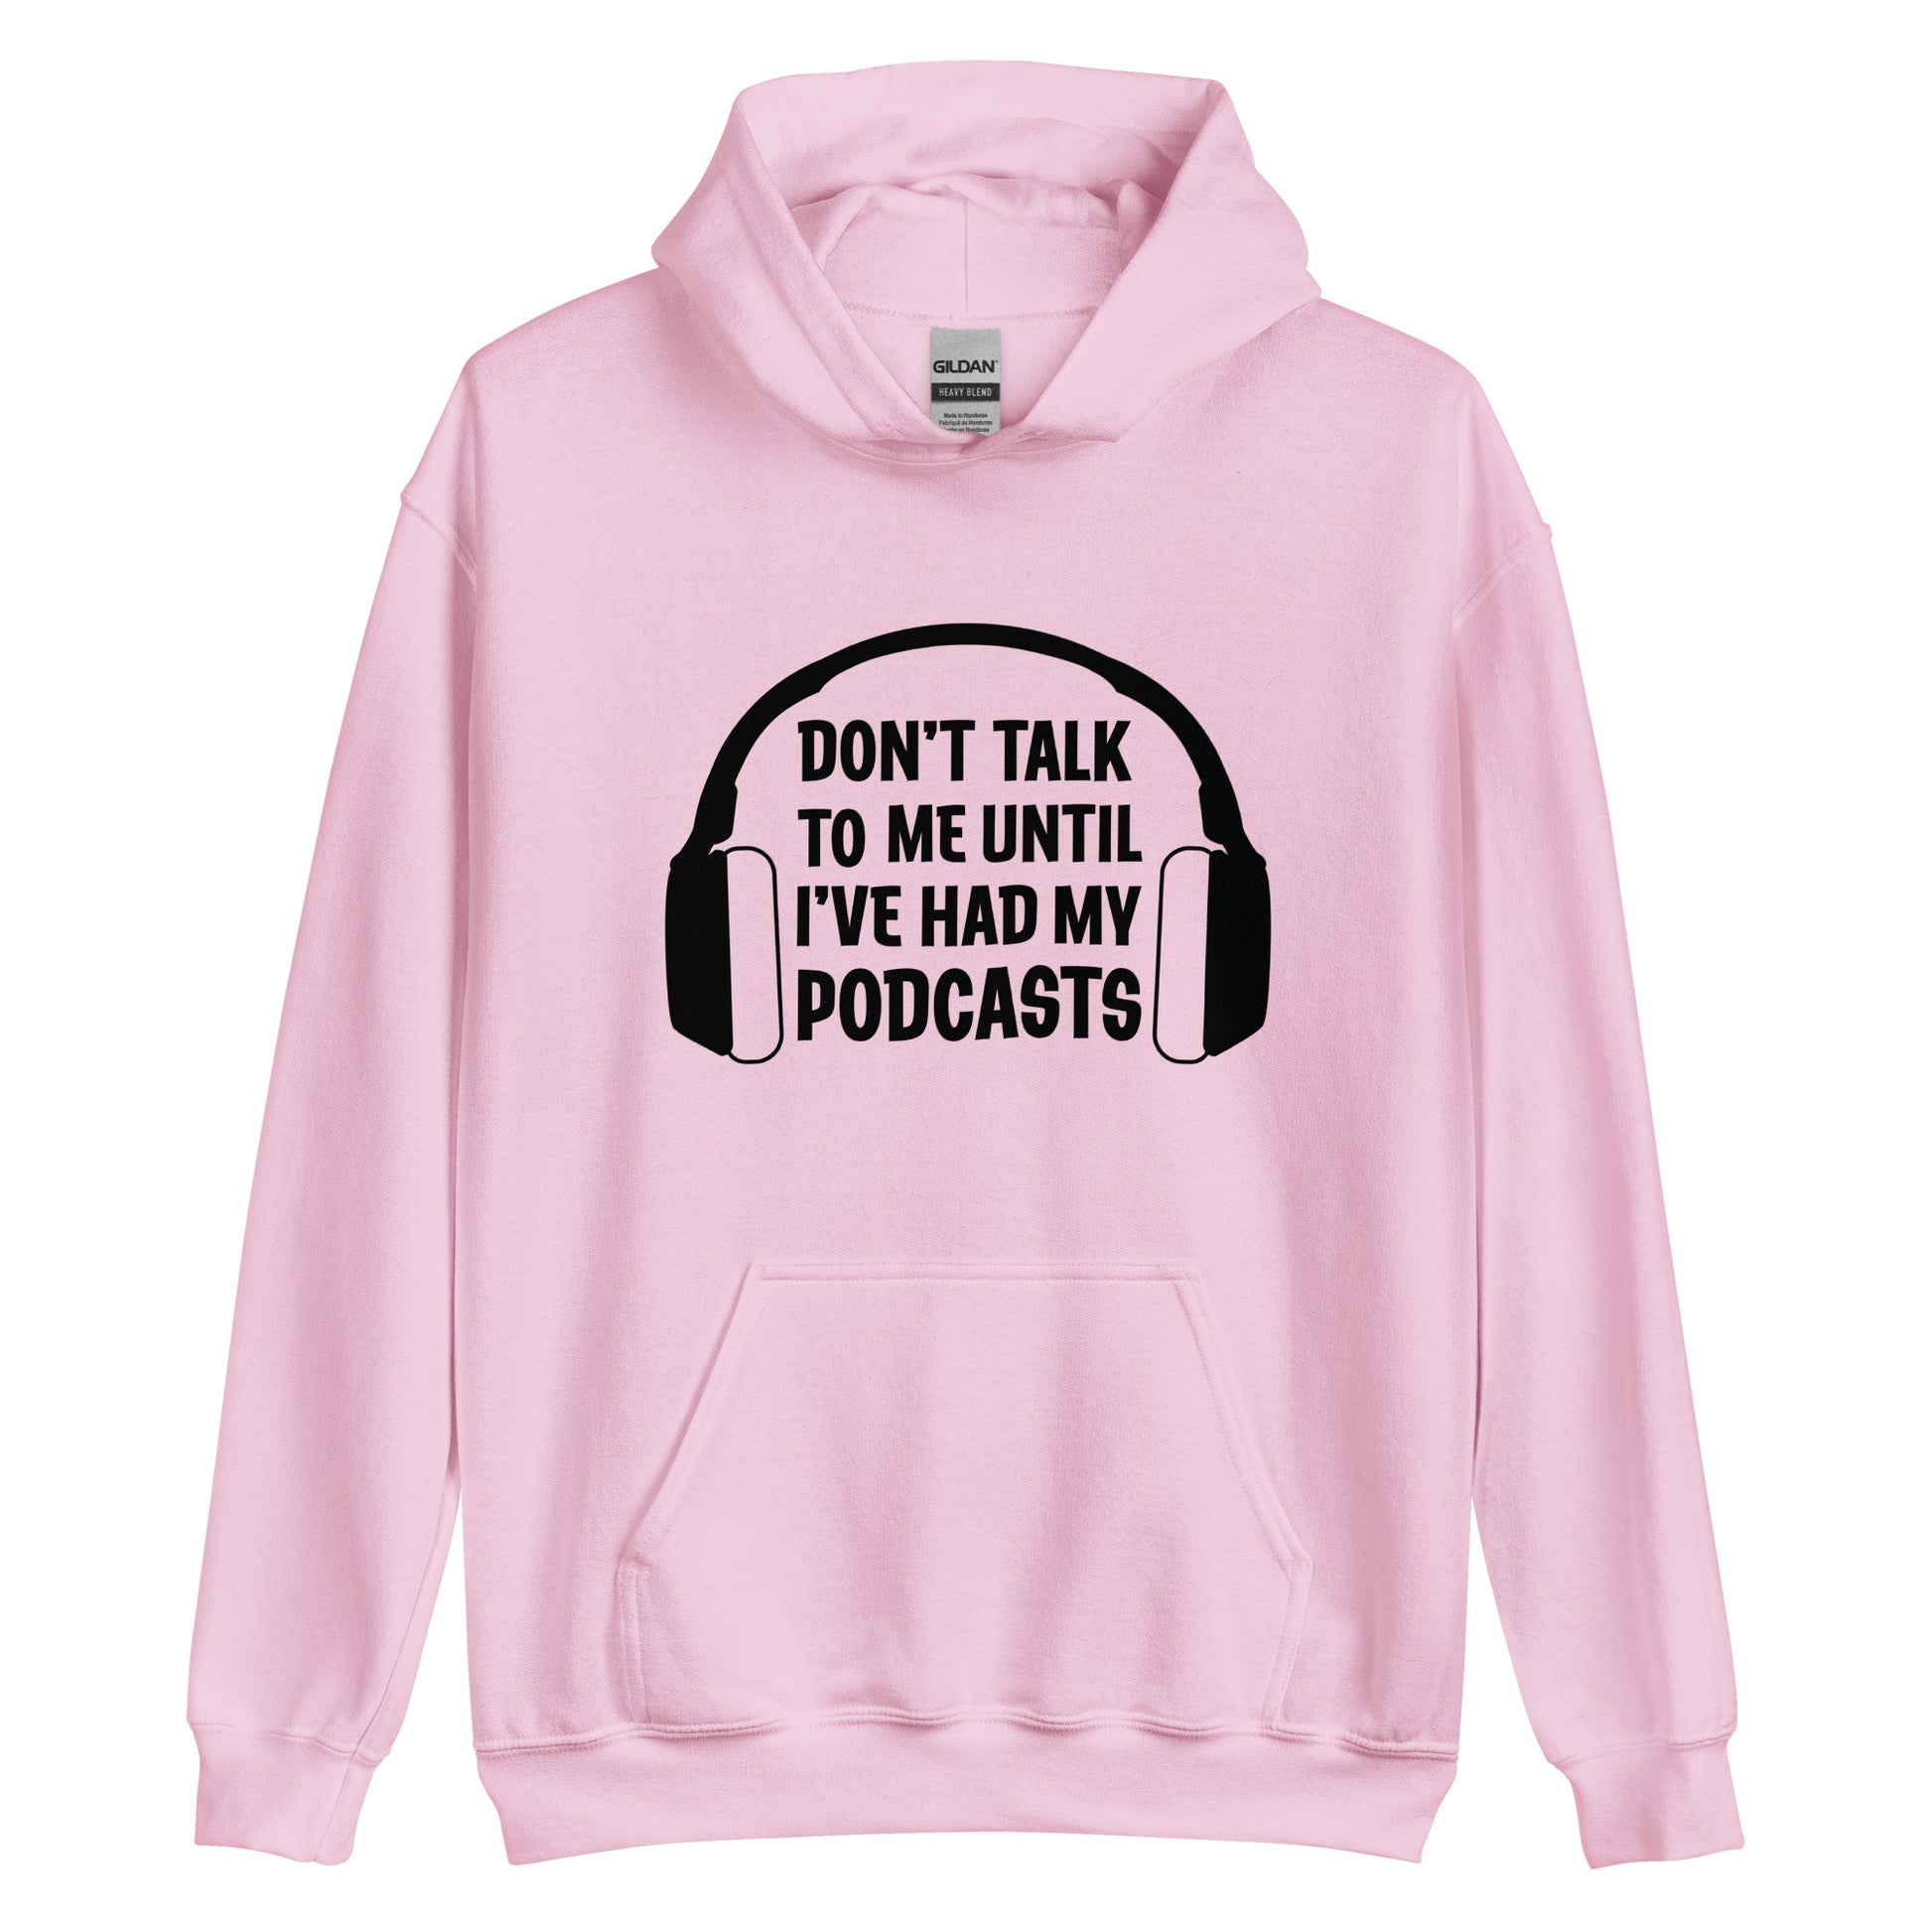 A light pink hooded sweatshirt with a picture of headphones and text reading "Don't talk to me until I've had my podcasts"